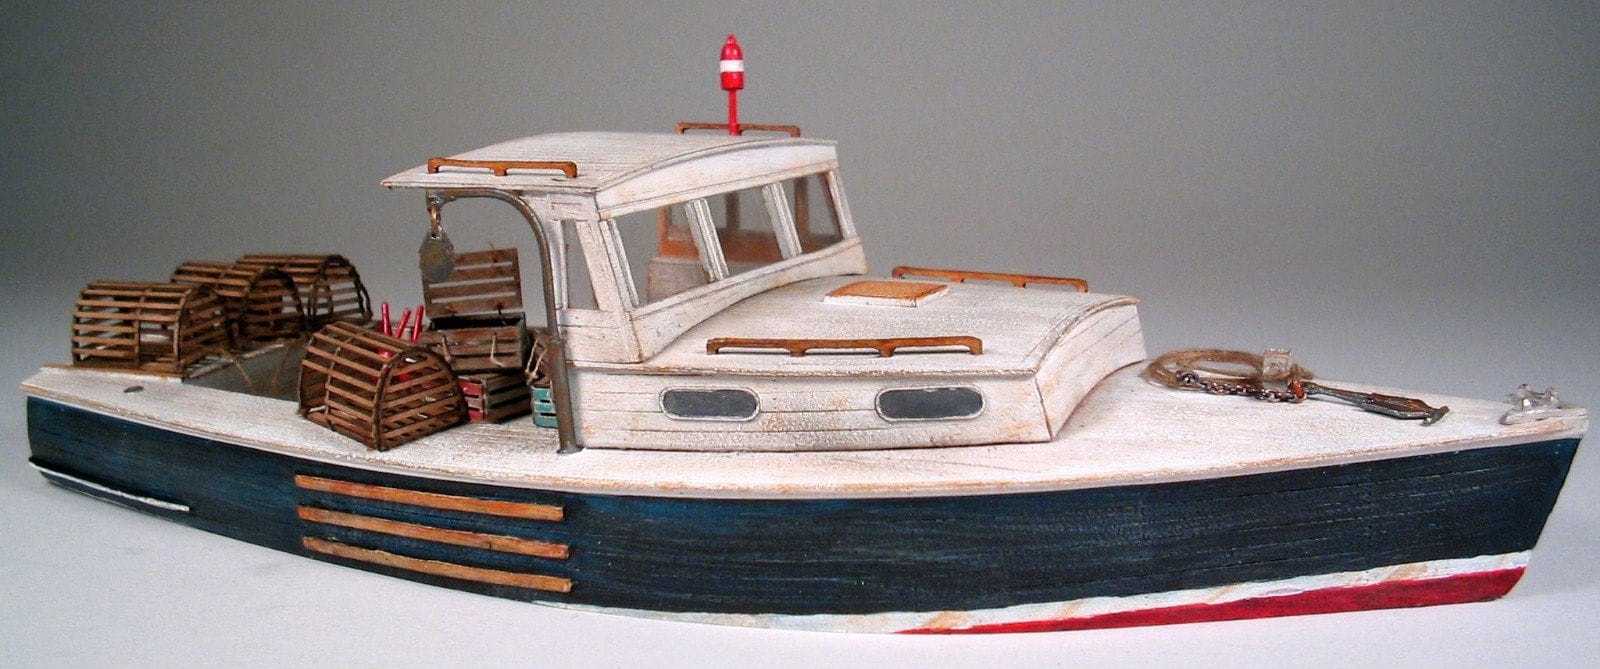 O/on30 1:48 Scale 34' Lobster Boat Kit for Diorama, Model